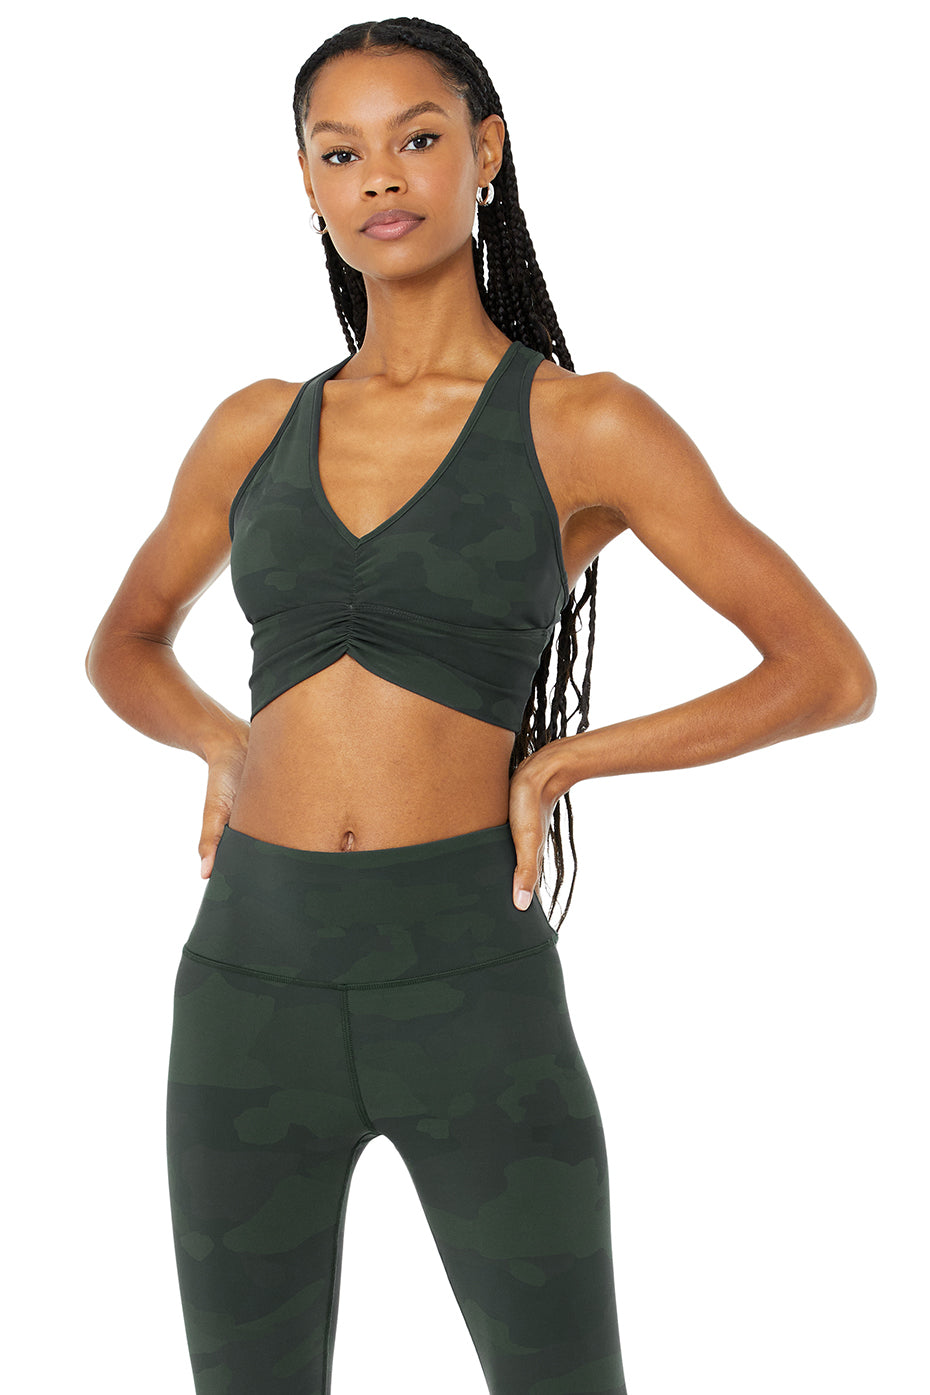 Vapor Wild Thing Bra in Hunter Camouflage by Alo Yoga